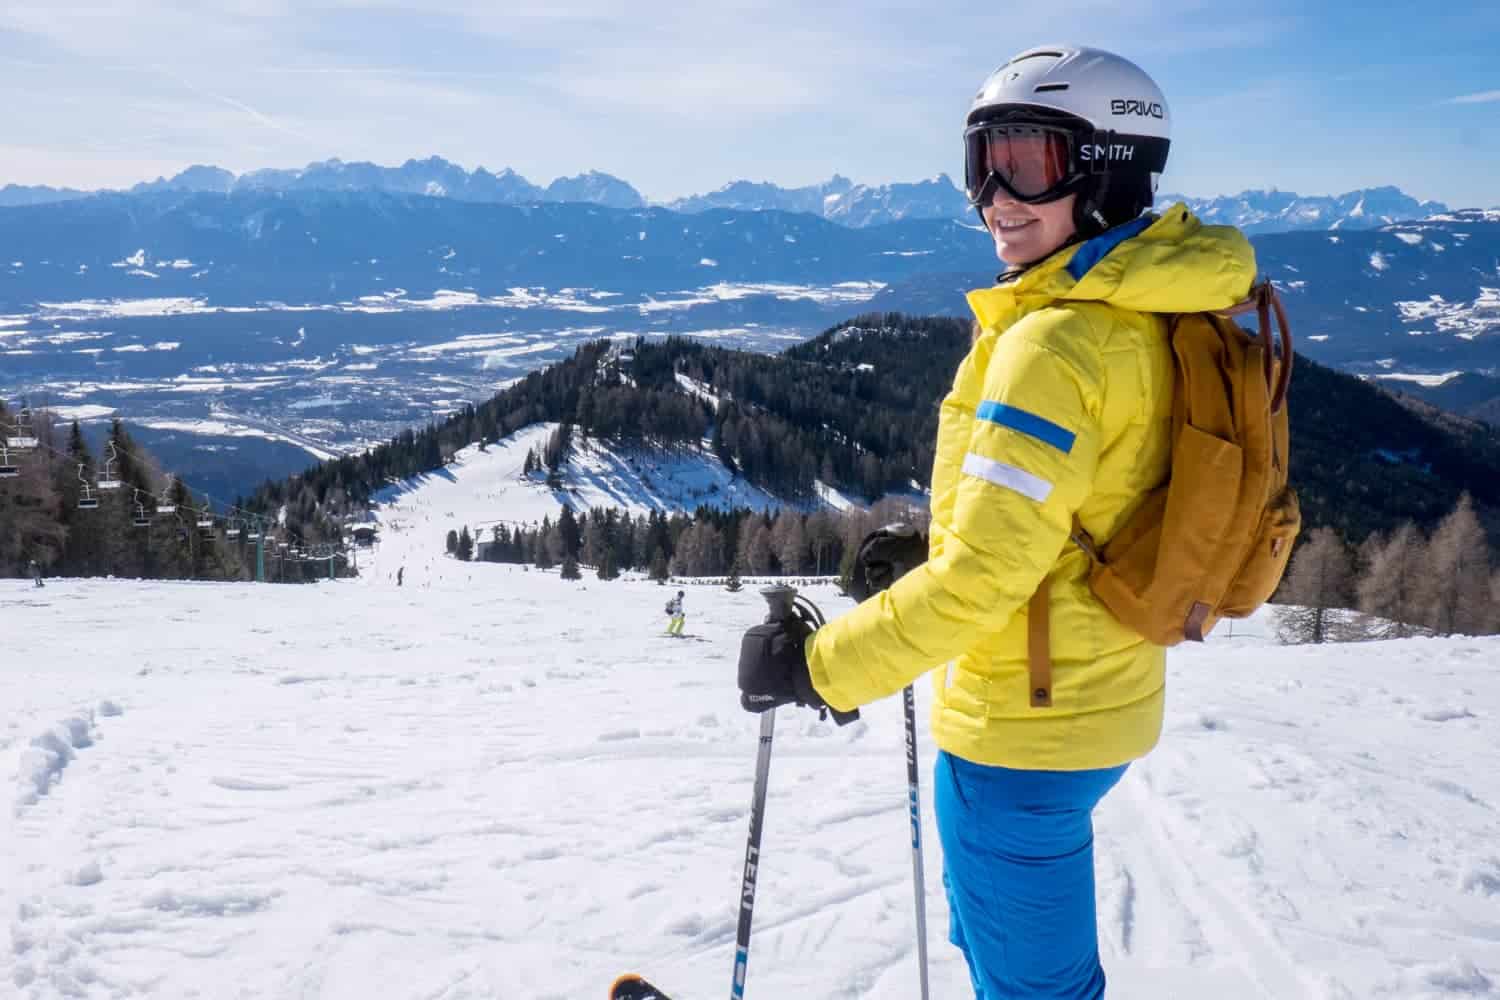 Our Favorite Snow Gear for Skiing This Winter 